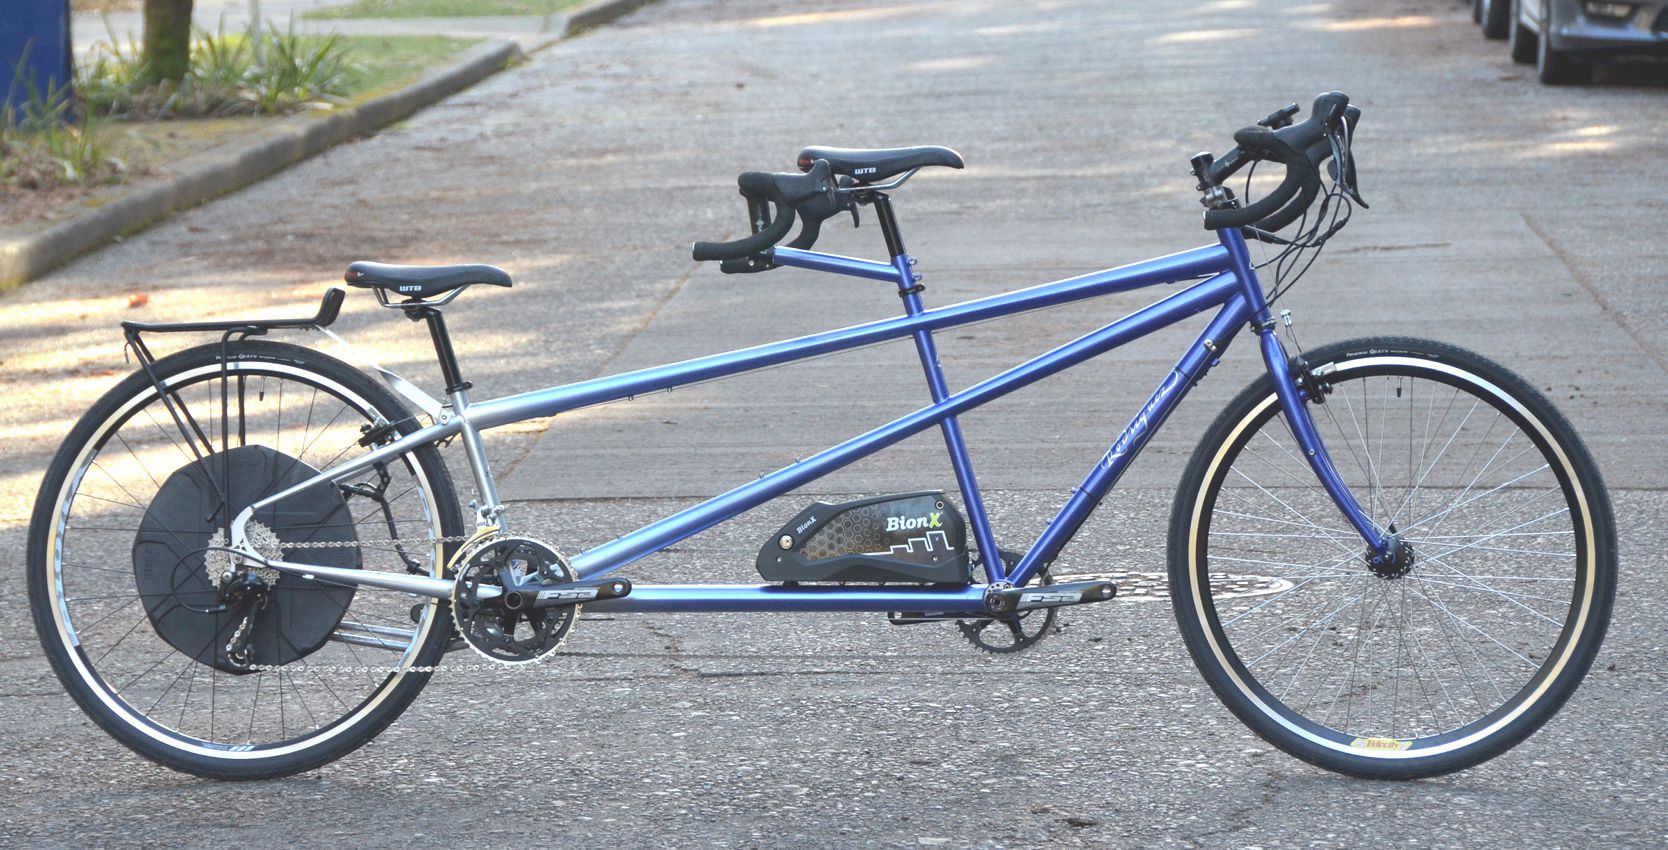 Rodriguez tandem bike with electric assist motor